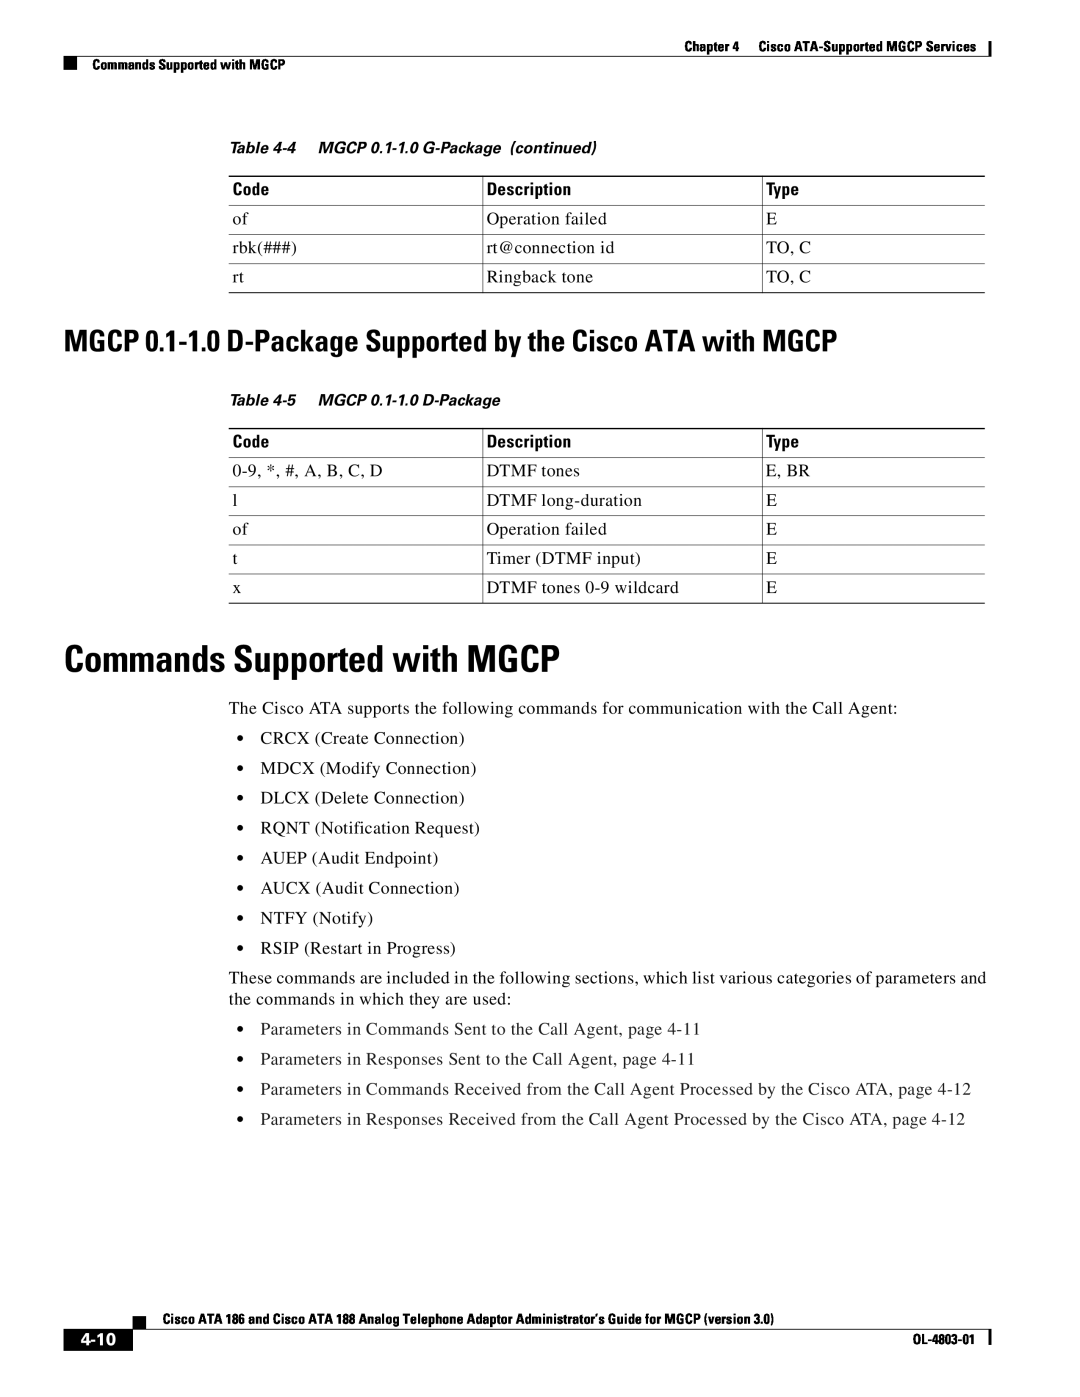 Cisco Systems ATA 186 Commands Supported with MGCP, MGCP 0.1-1.0 D-Package Supported by the Cisco ATA with MGCP, 4-10 